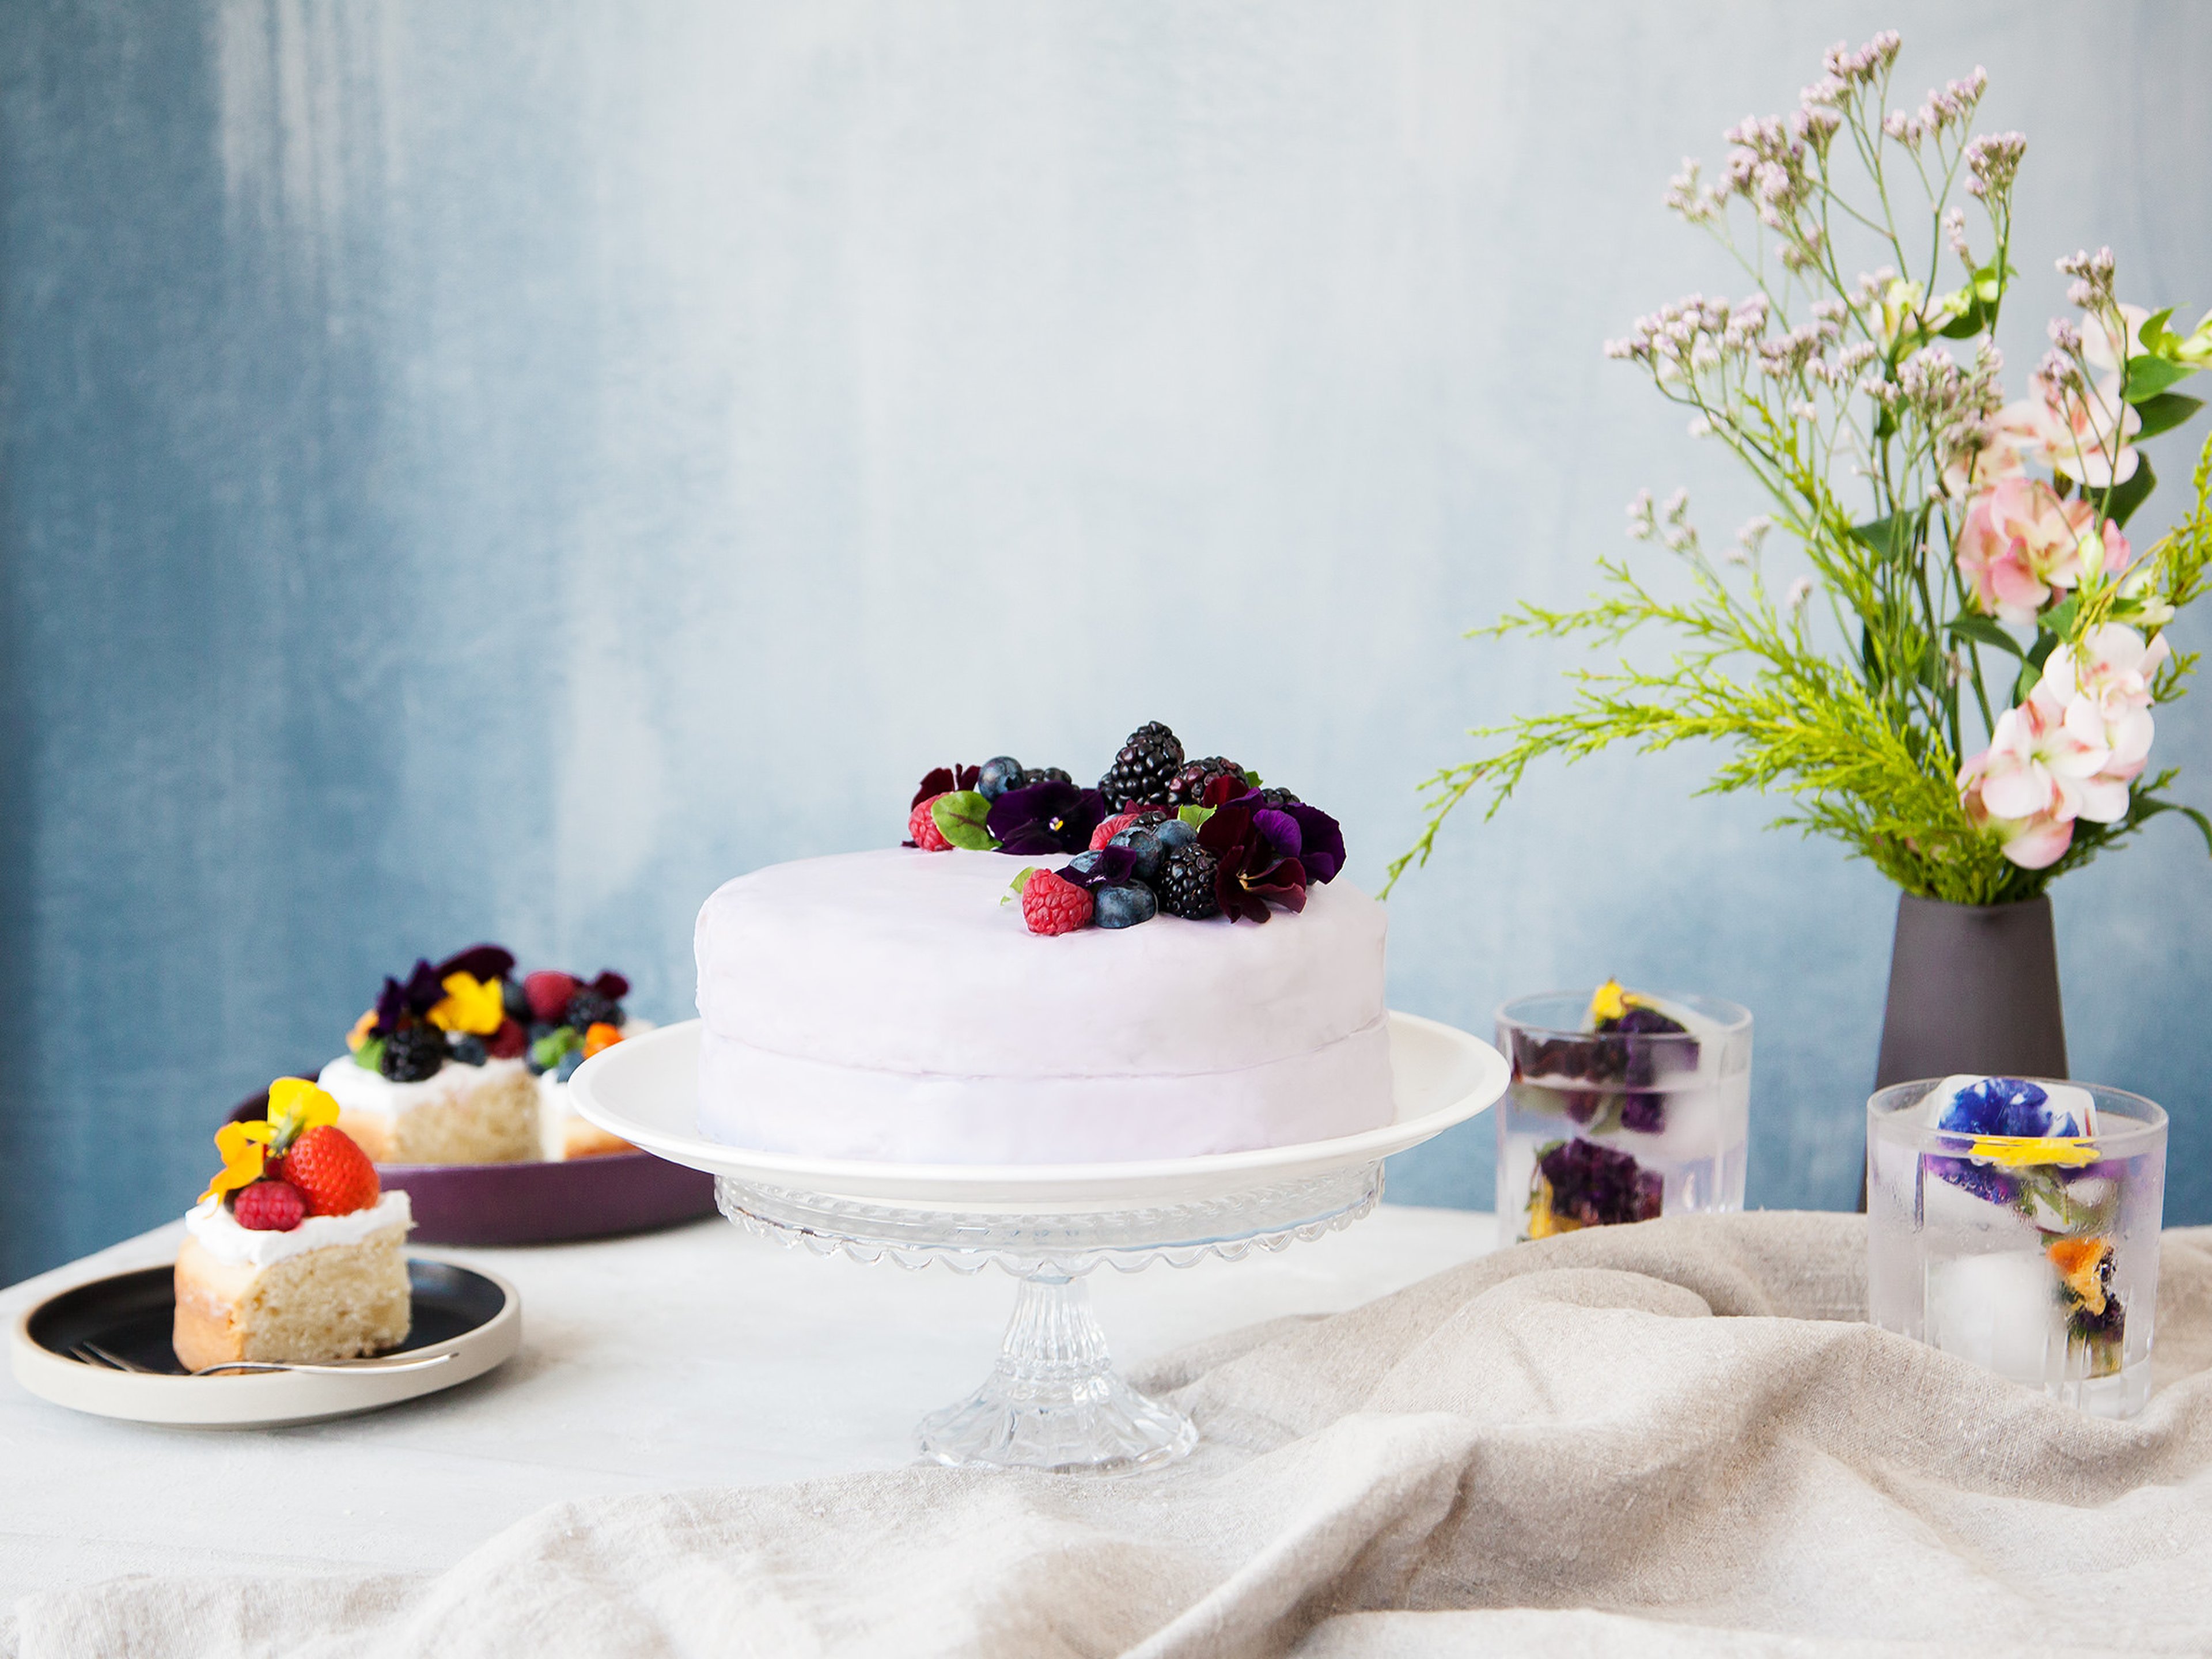 27 Types of Edible Flowers and How to Use Them